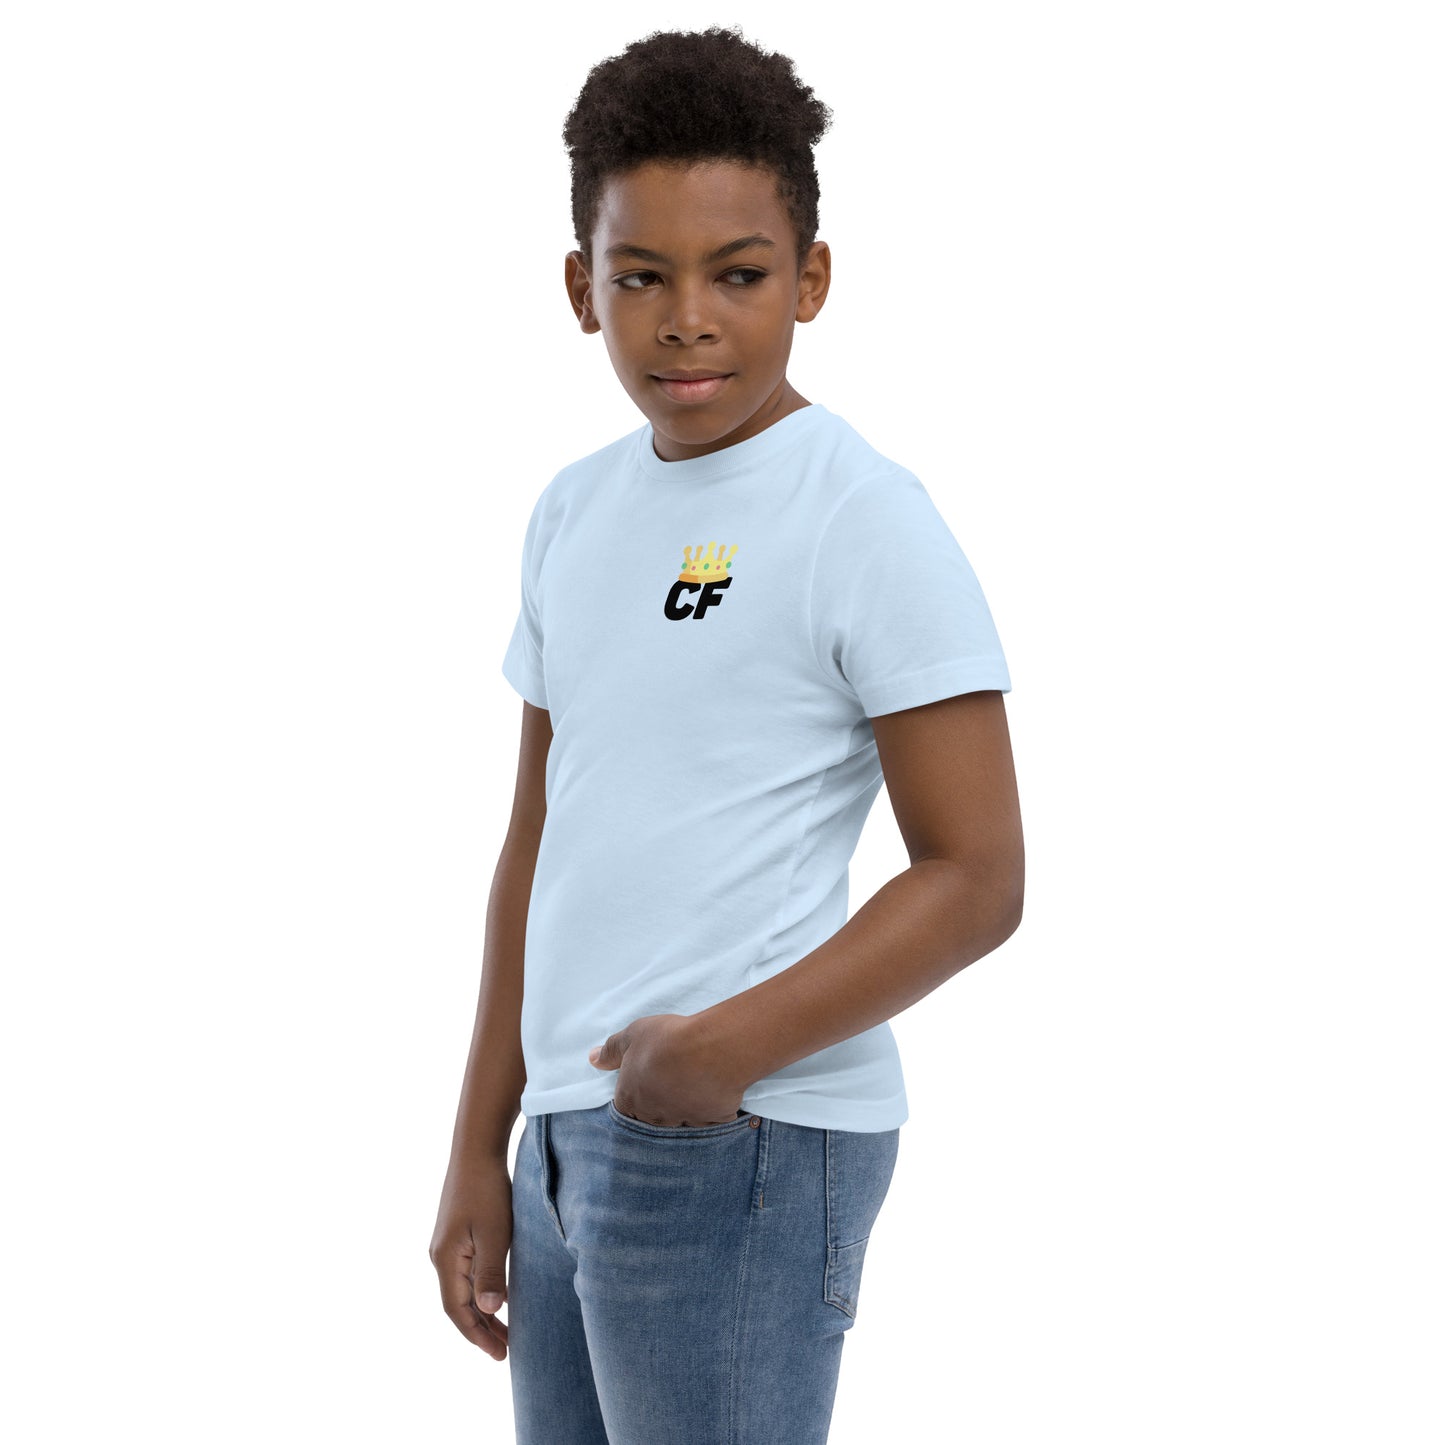 Coldest Football Youth jersey t-shirt